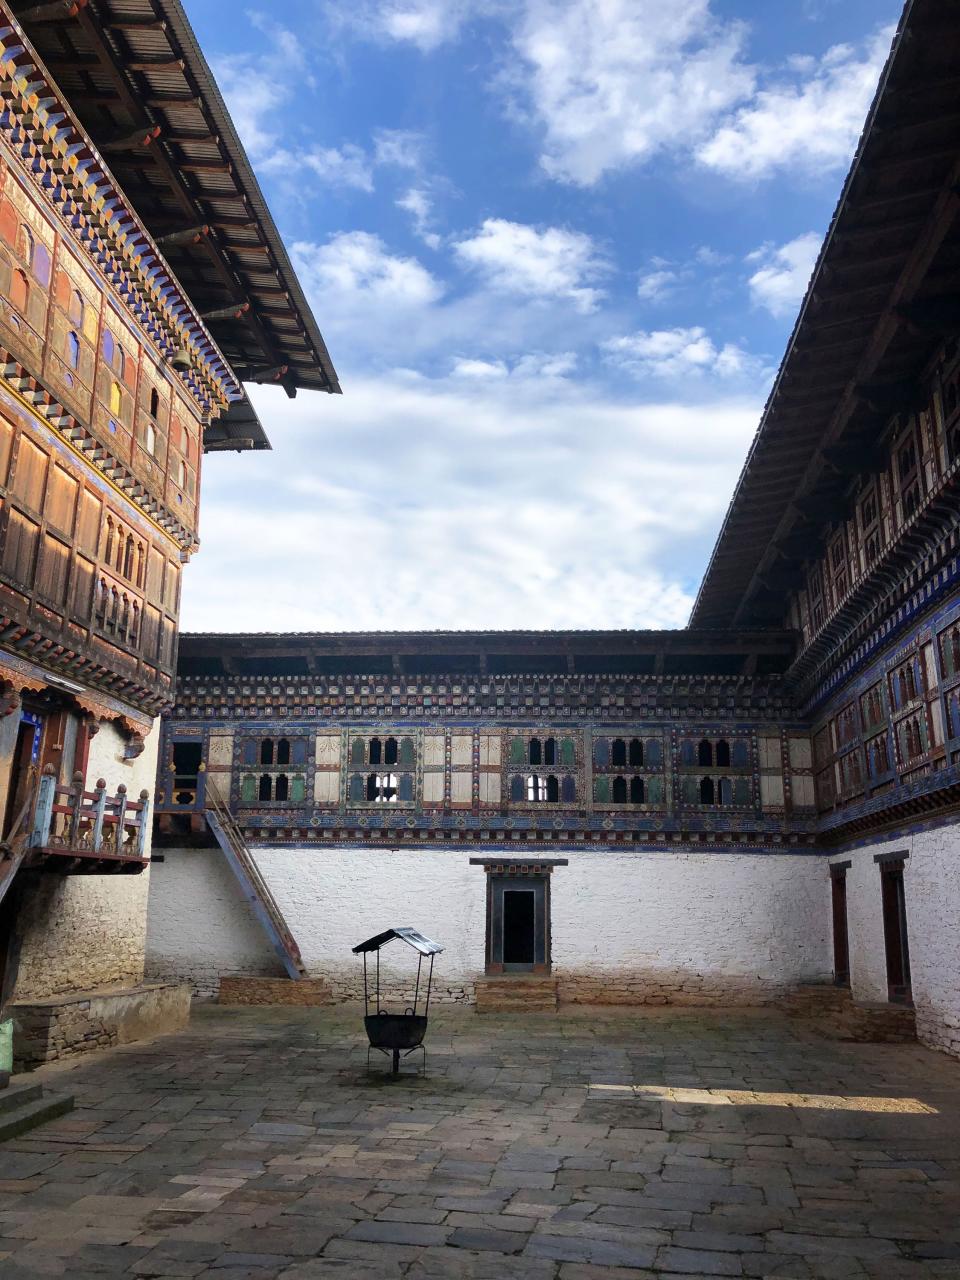 A view of the courtyard of Bhutan's 19th-century Wangduechhoeling Palace—located in the country's central Bumthang Valley, which is filled with Buddhist monasteries, ancient temples, and shrines—looking south, with an utse—a tower that contains the palace's sacred shrine—at left.